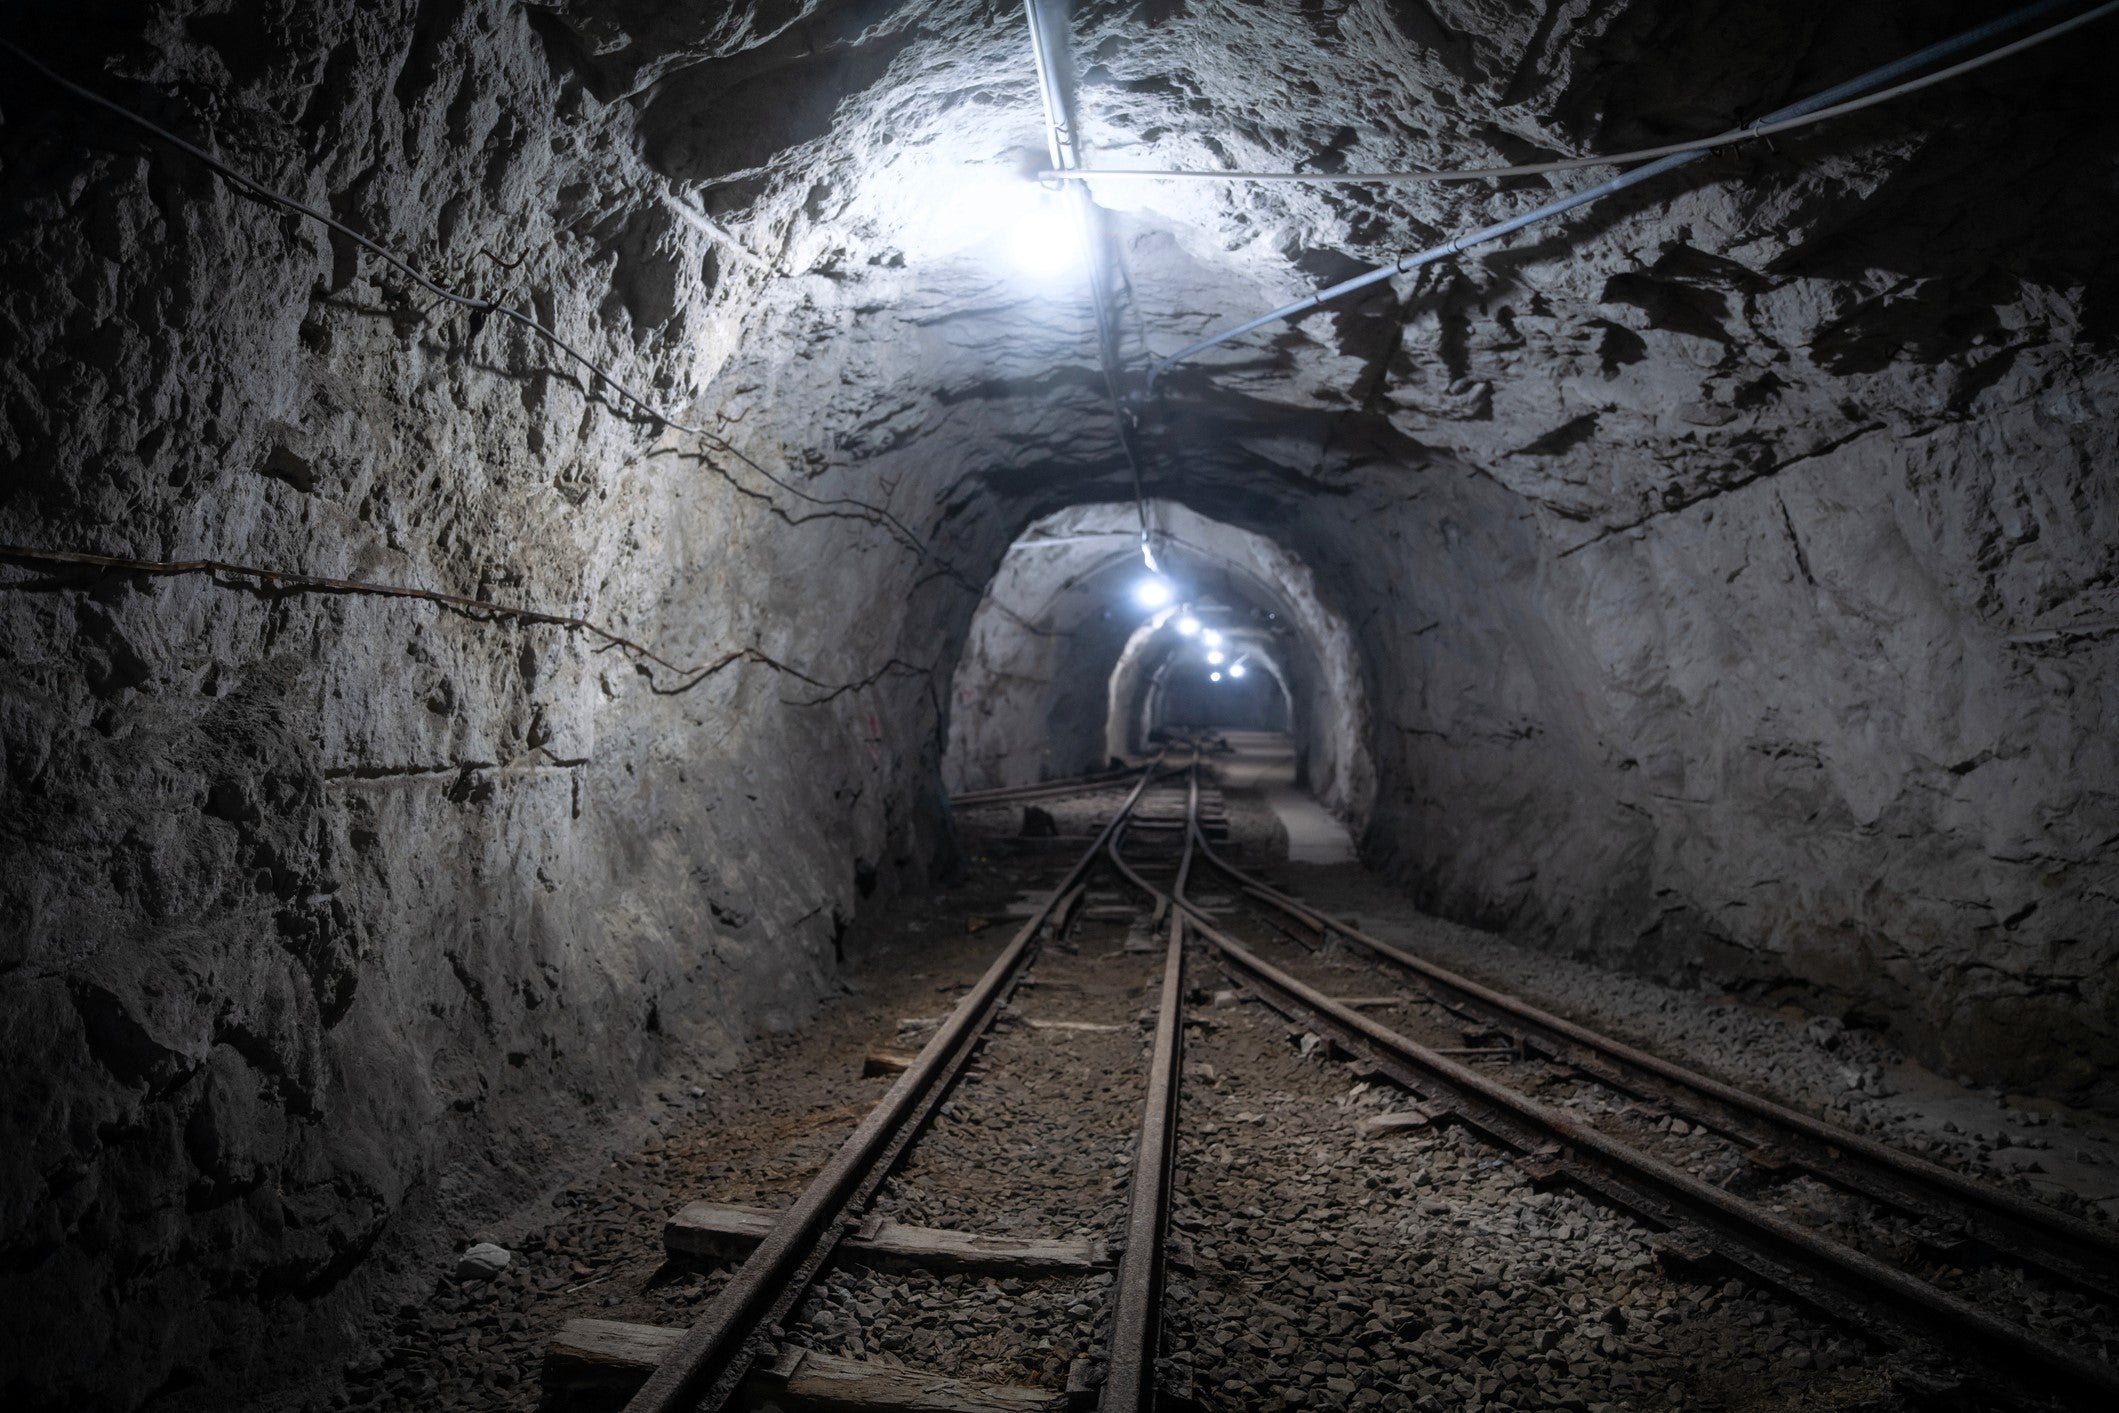 Disused mines have the potential to store vast amounts of electricity using gravity batteries